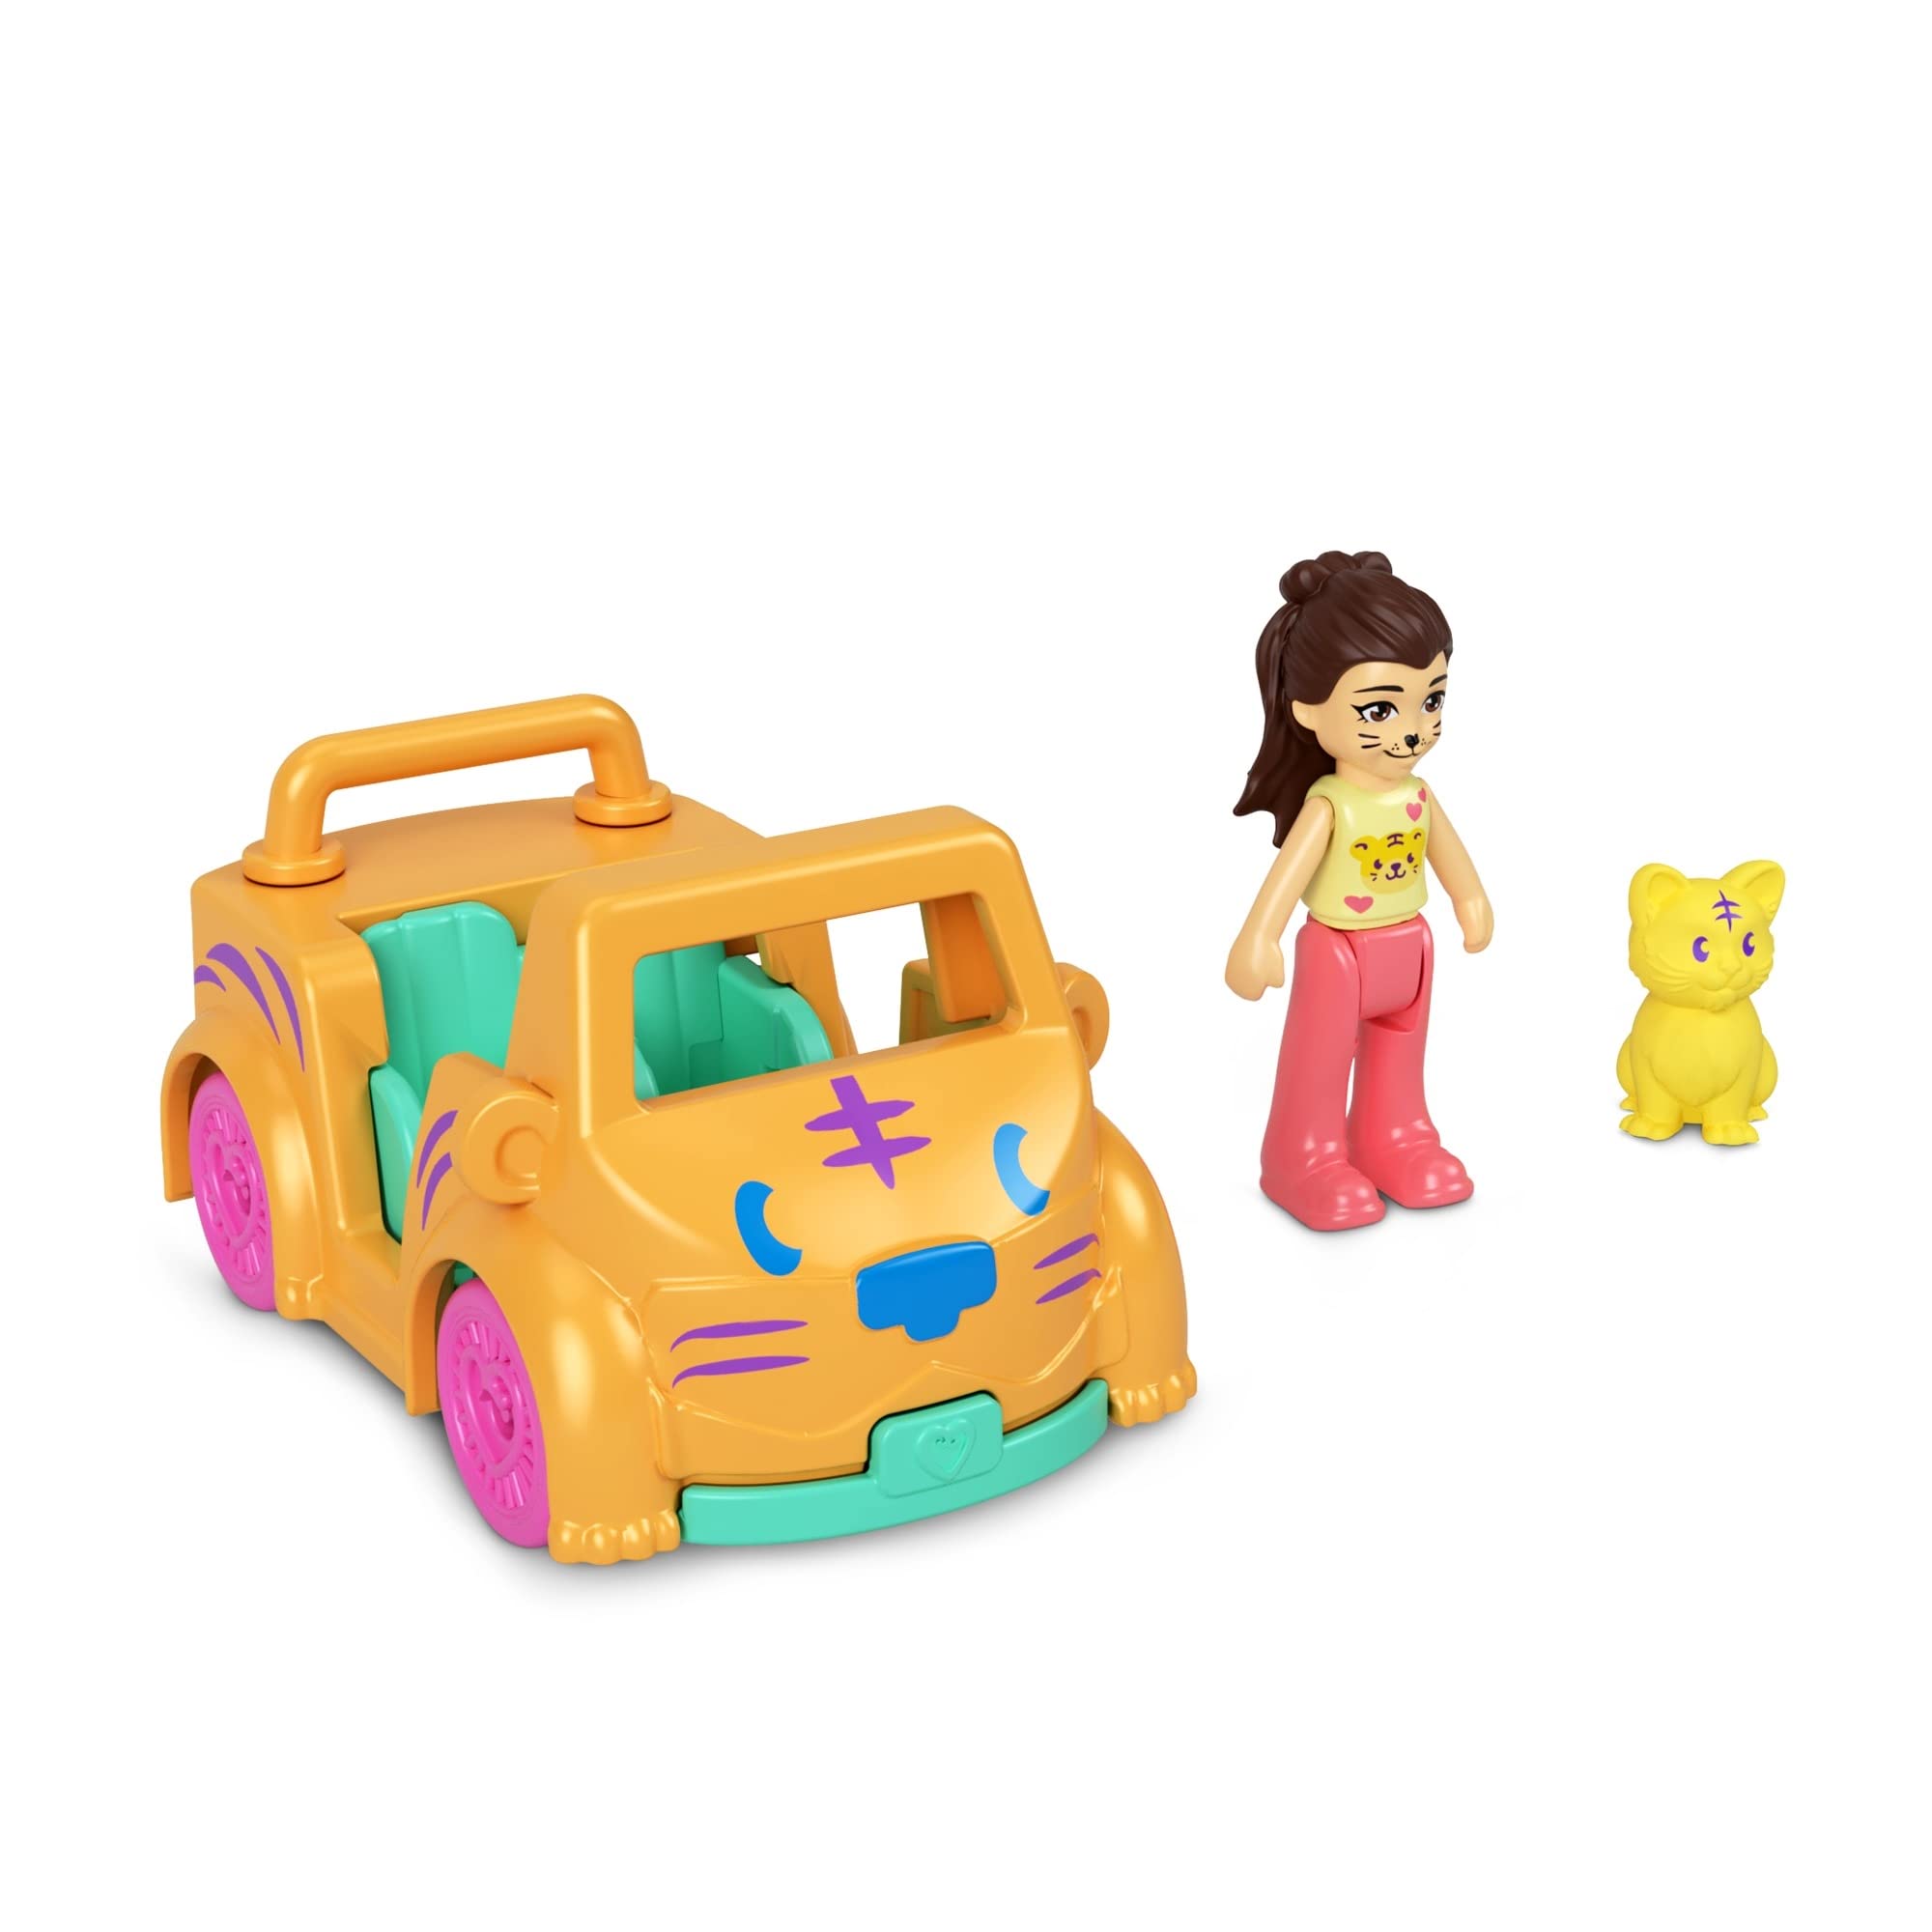 Polly Pocket Tiger Car Playset for Girls Ages 4 and Up